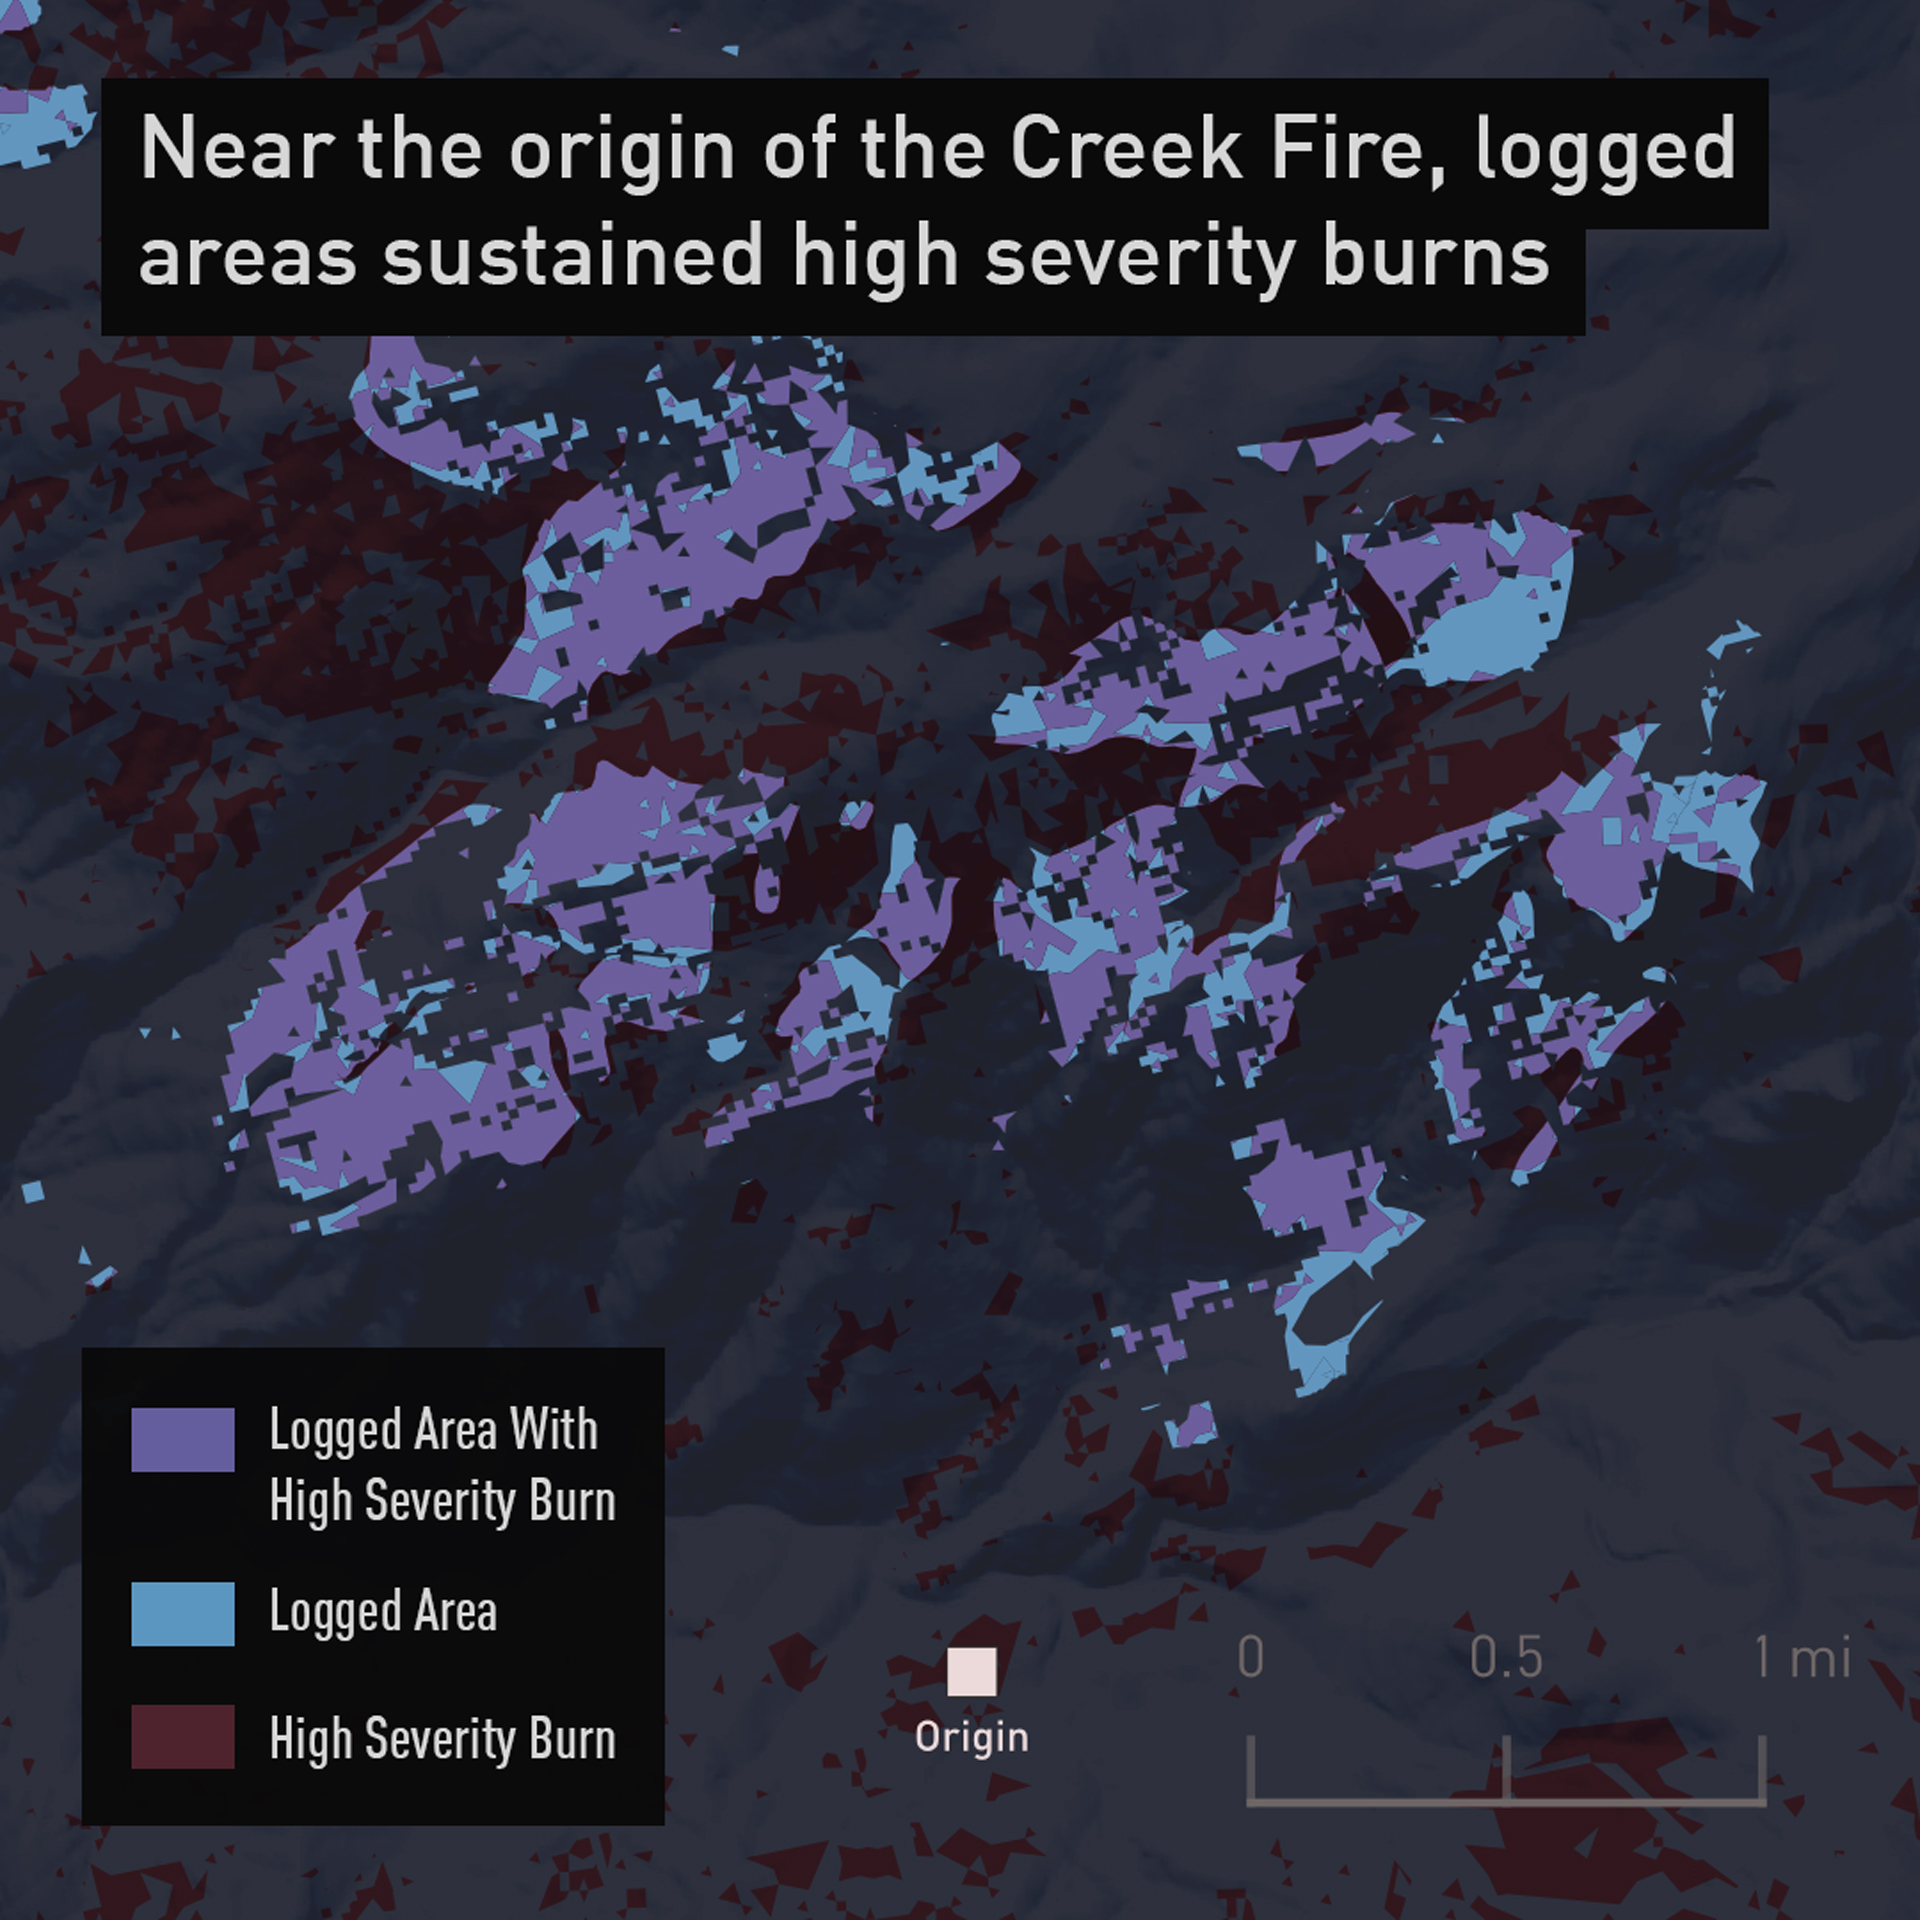 Near the origin of the Creek Fire, logged areas sustained high severity burns.